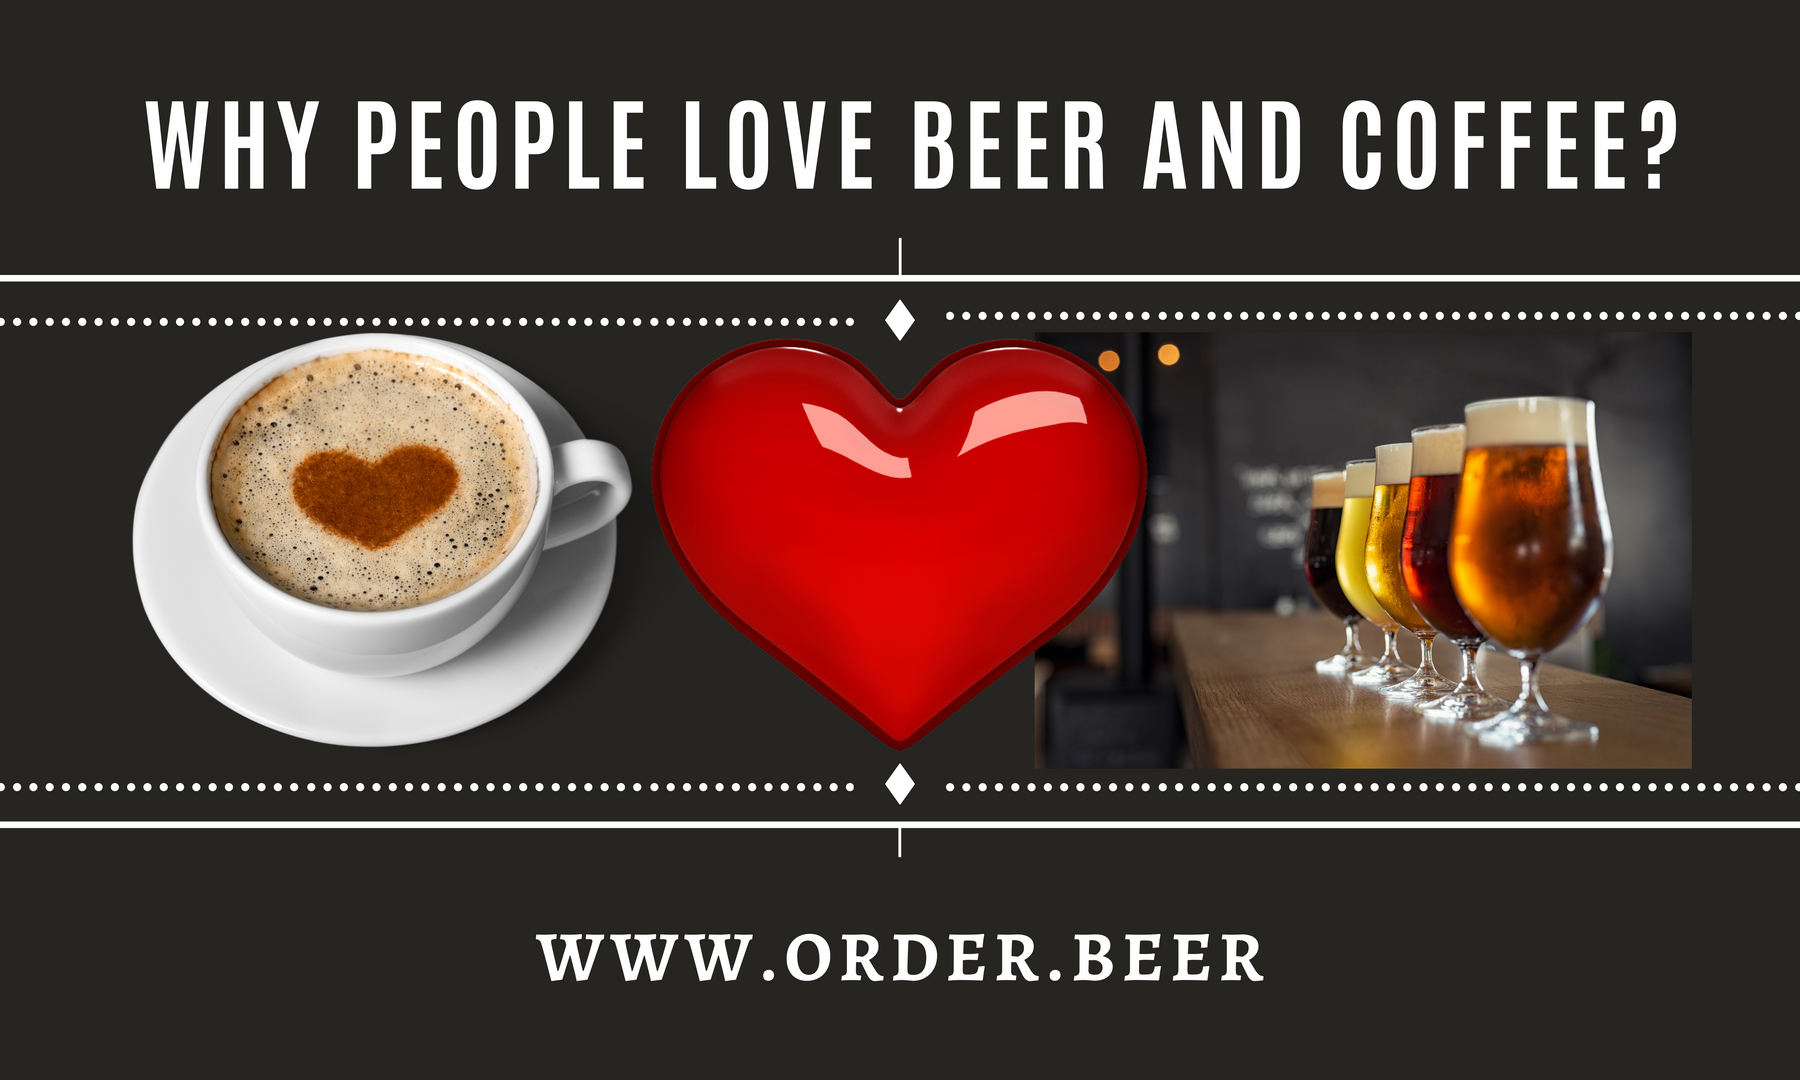 Why do people love beer and coffee?